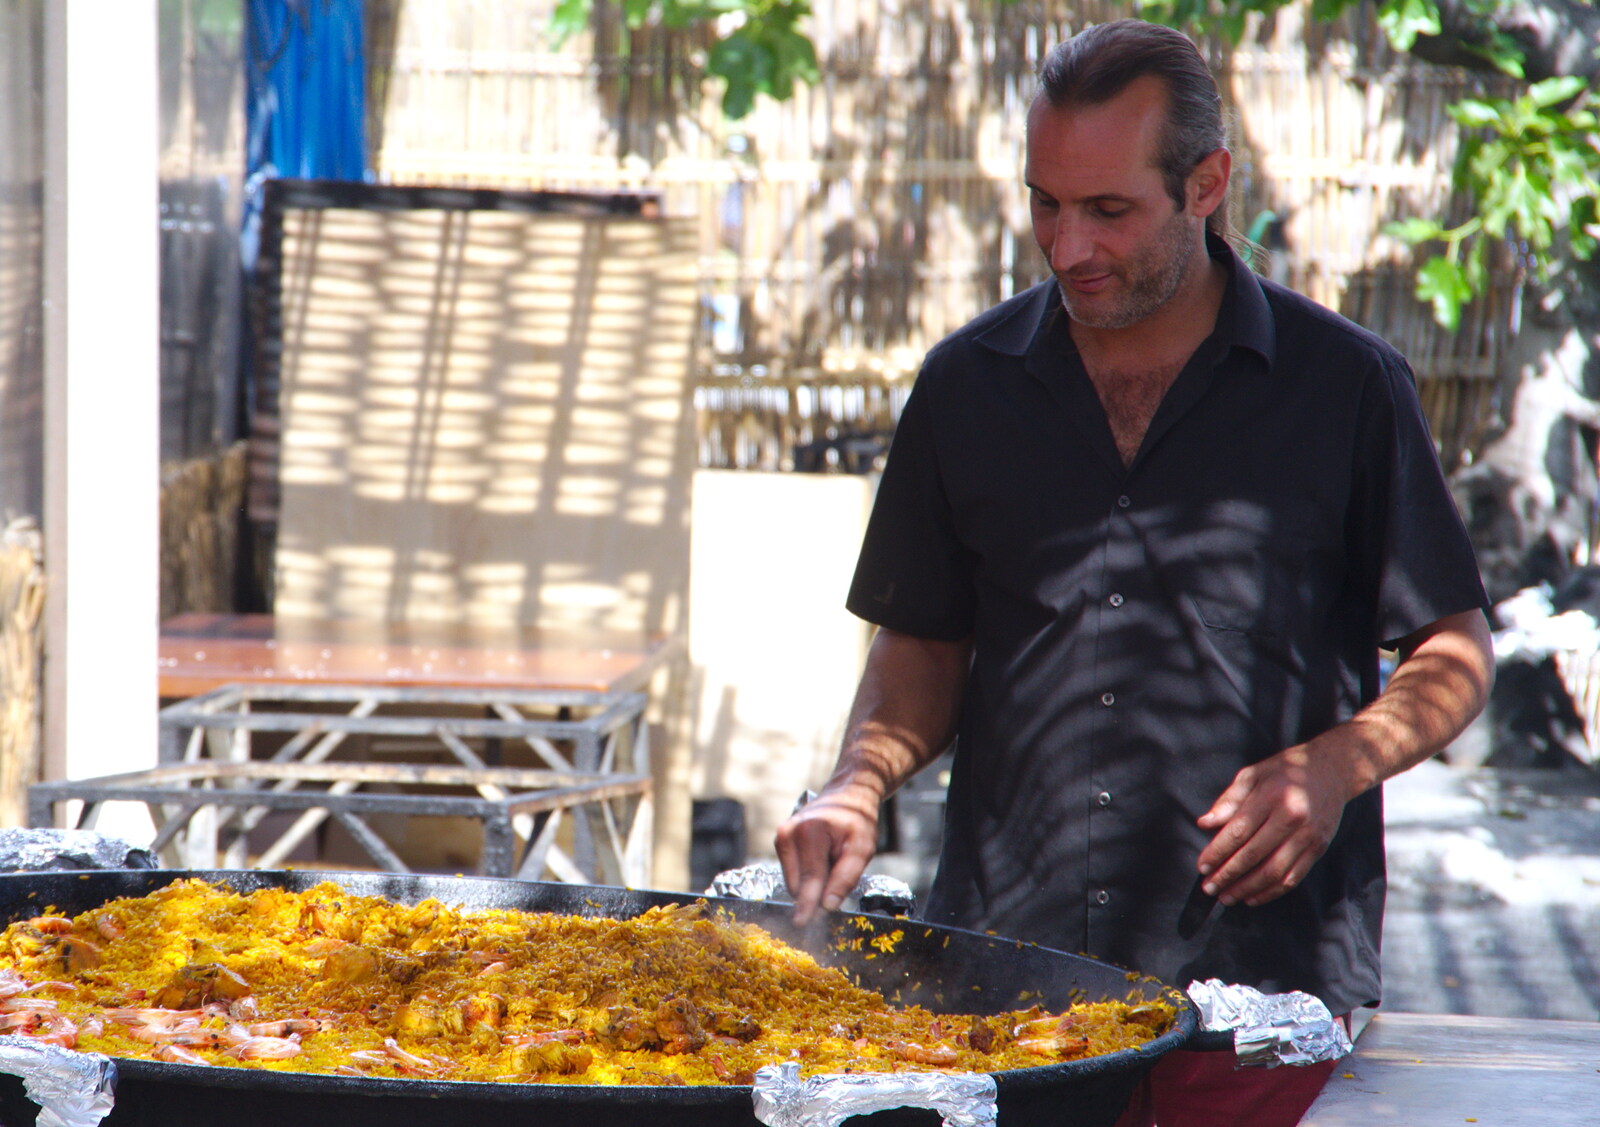 The dude tends to his paella from A Walk up a Hill, Paella on the Beach and Granada, Andalusia, Spain - 19th April 2018